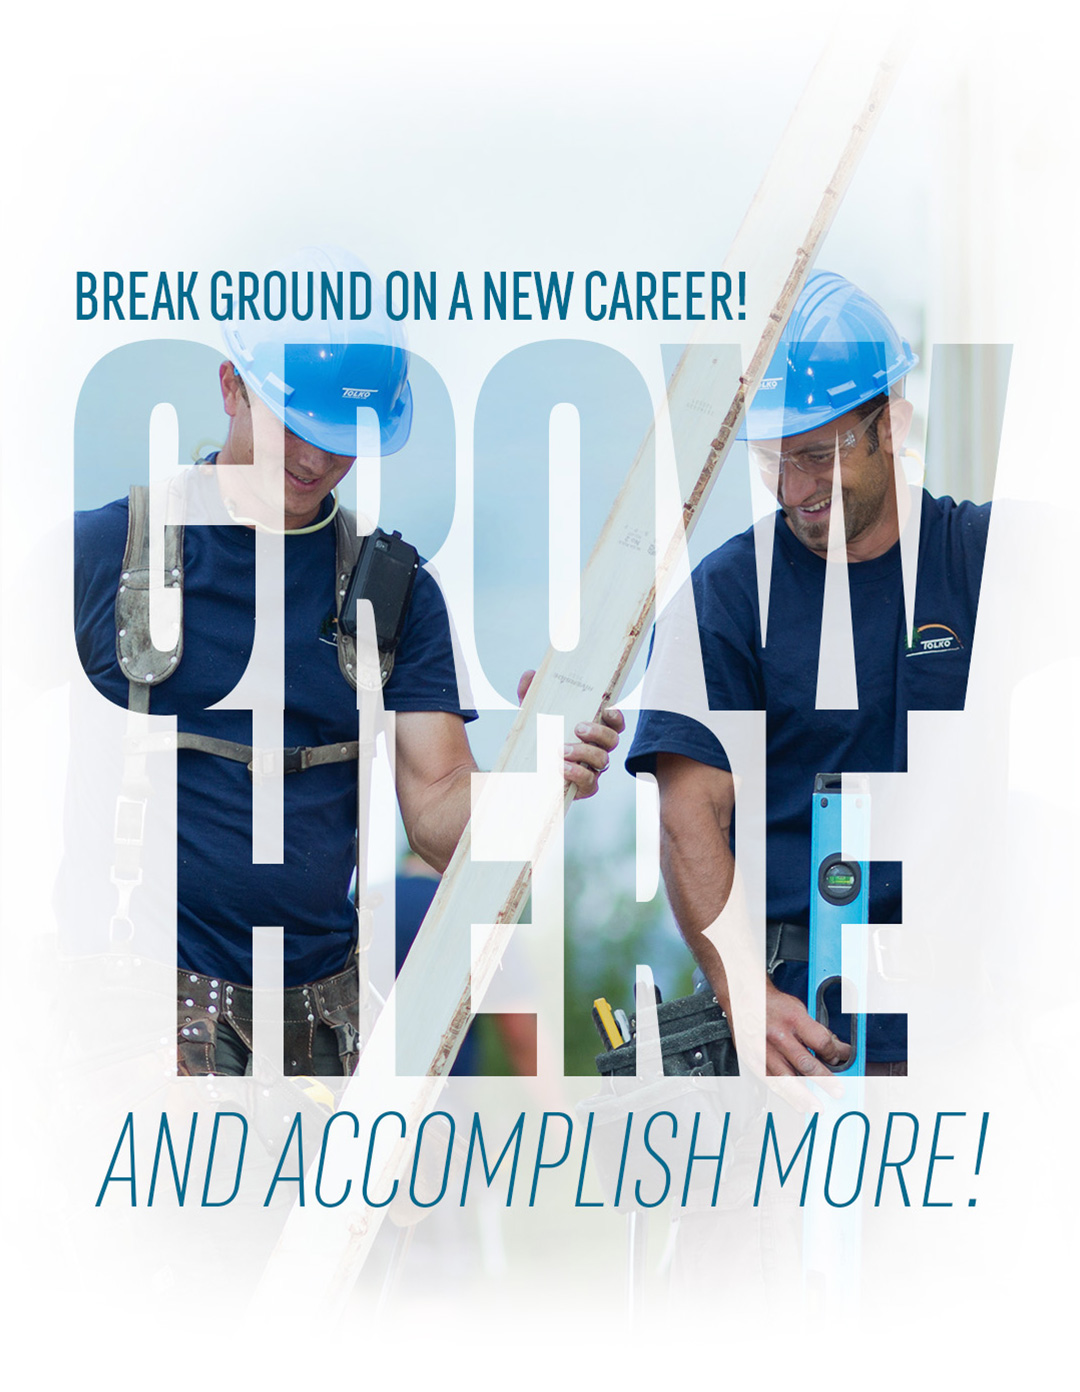 Break ground on a new career! Grow here and accomplish more!